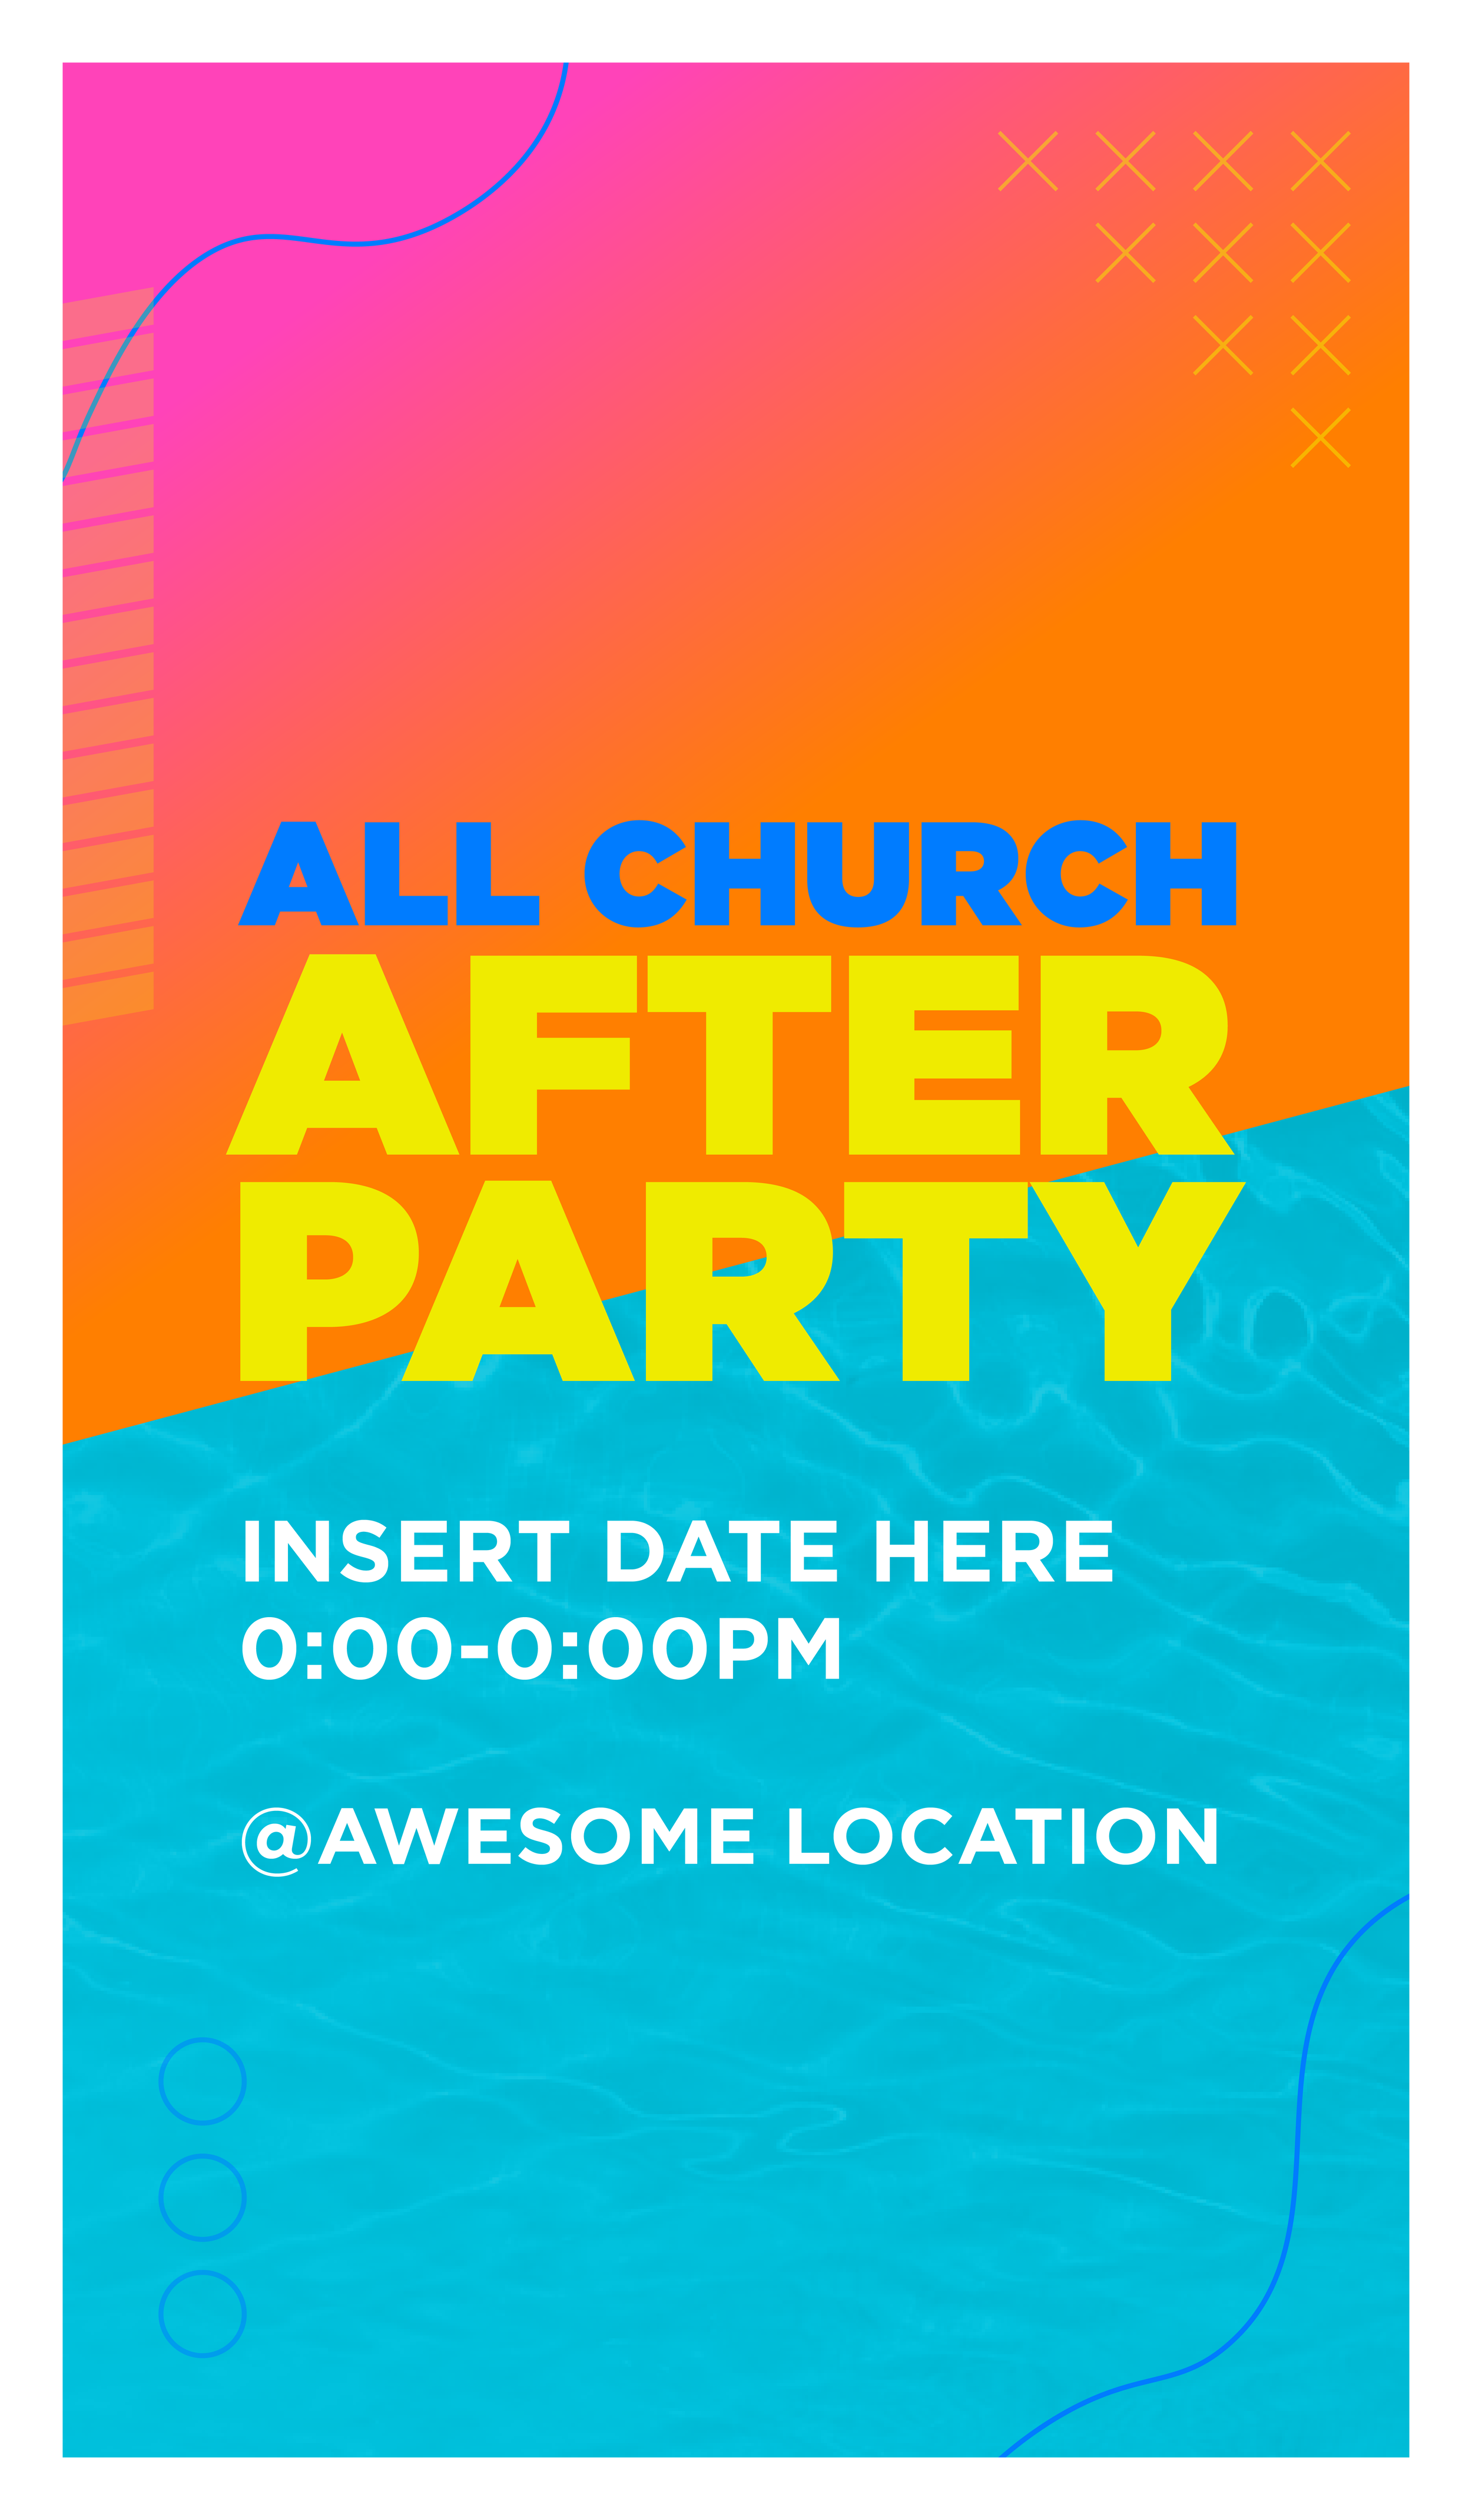 z_Previews_All Church After Party_SM Story.png